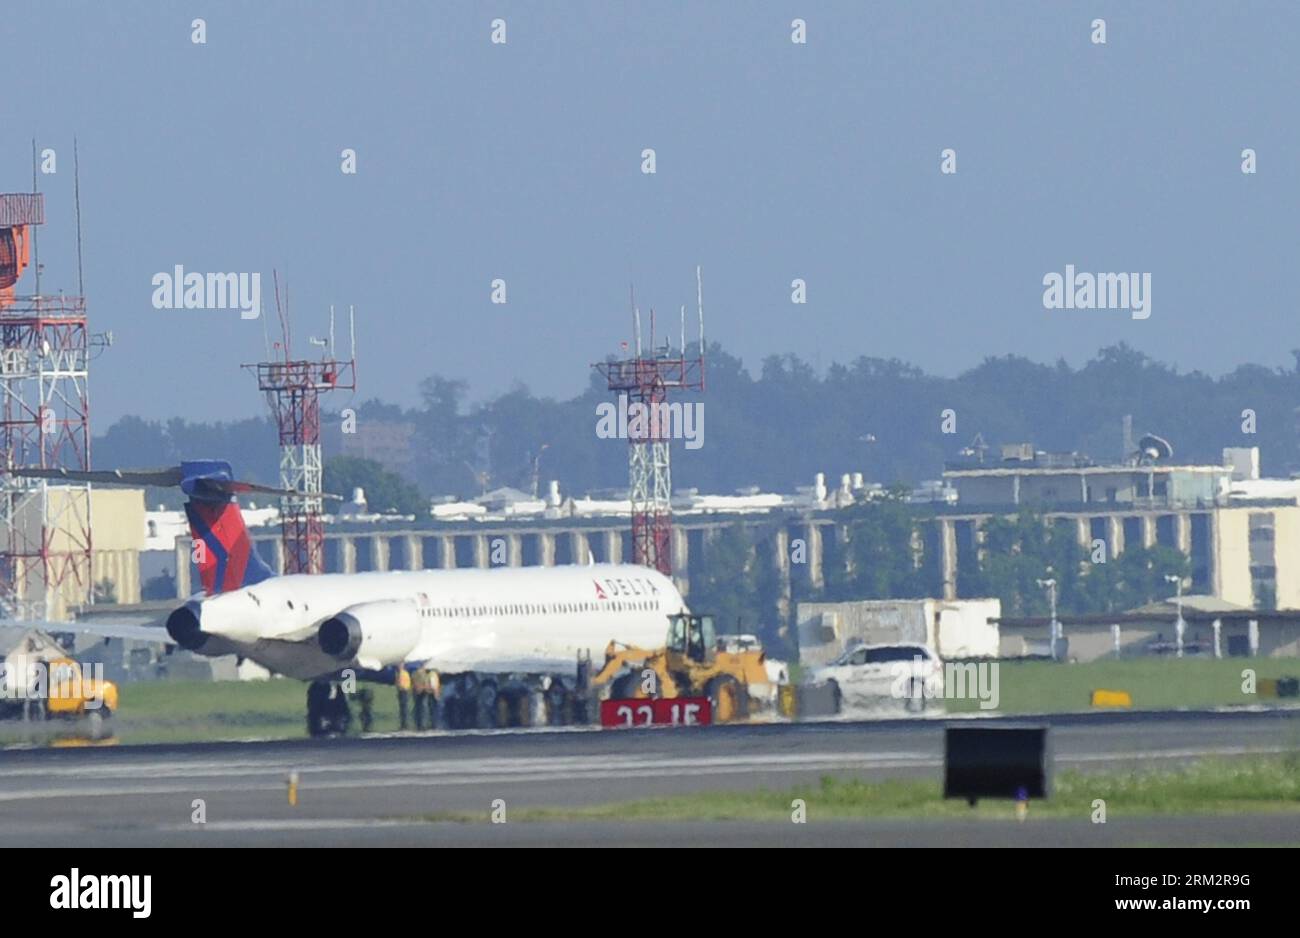 Bildnummer: 59898072  Datum: 24.06.2013  Copyright: imago/Xinhua WASHINGTON, June 24, 2013 - Ground service personnel work around the plane of Delta airlines which veered off runway earlier at Ronald Reagan National Airport in Washington, capital of the United States, June 24, 2013. The Delta MD-90 passenger jet on Monday veered off runway while taking off at the airport and got stuck in mud. No casualties were reported. (Xinhua/Fang Zhe) (axy) U.S.-WASHINGTON-DELTA PLANE-ACCIDENT PUBLICATIONxNOTxINxCHN Wirtschaft Flugzeug Unfall x0x xsk 2013 quer     59898072 Date 24 06 2013 Copyright Imago X Stock Photo